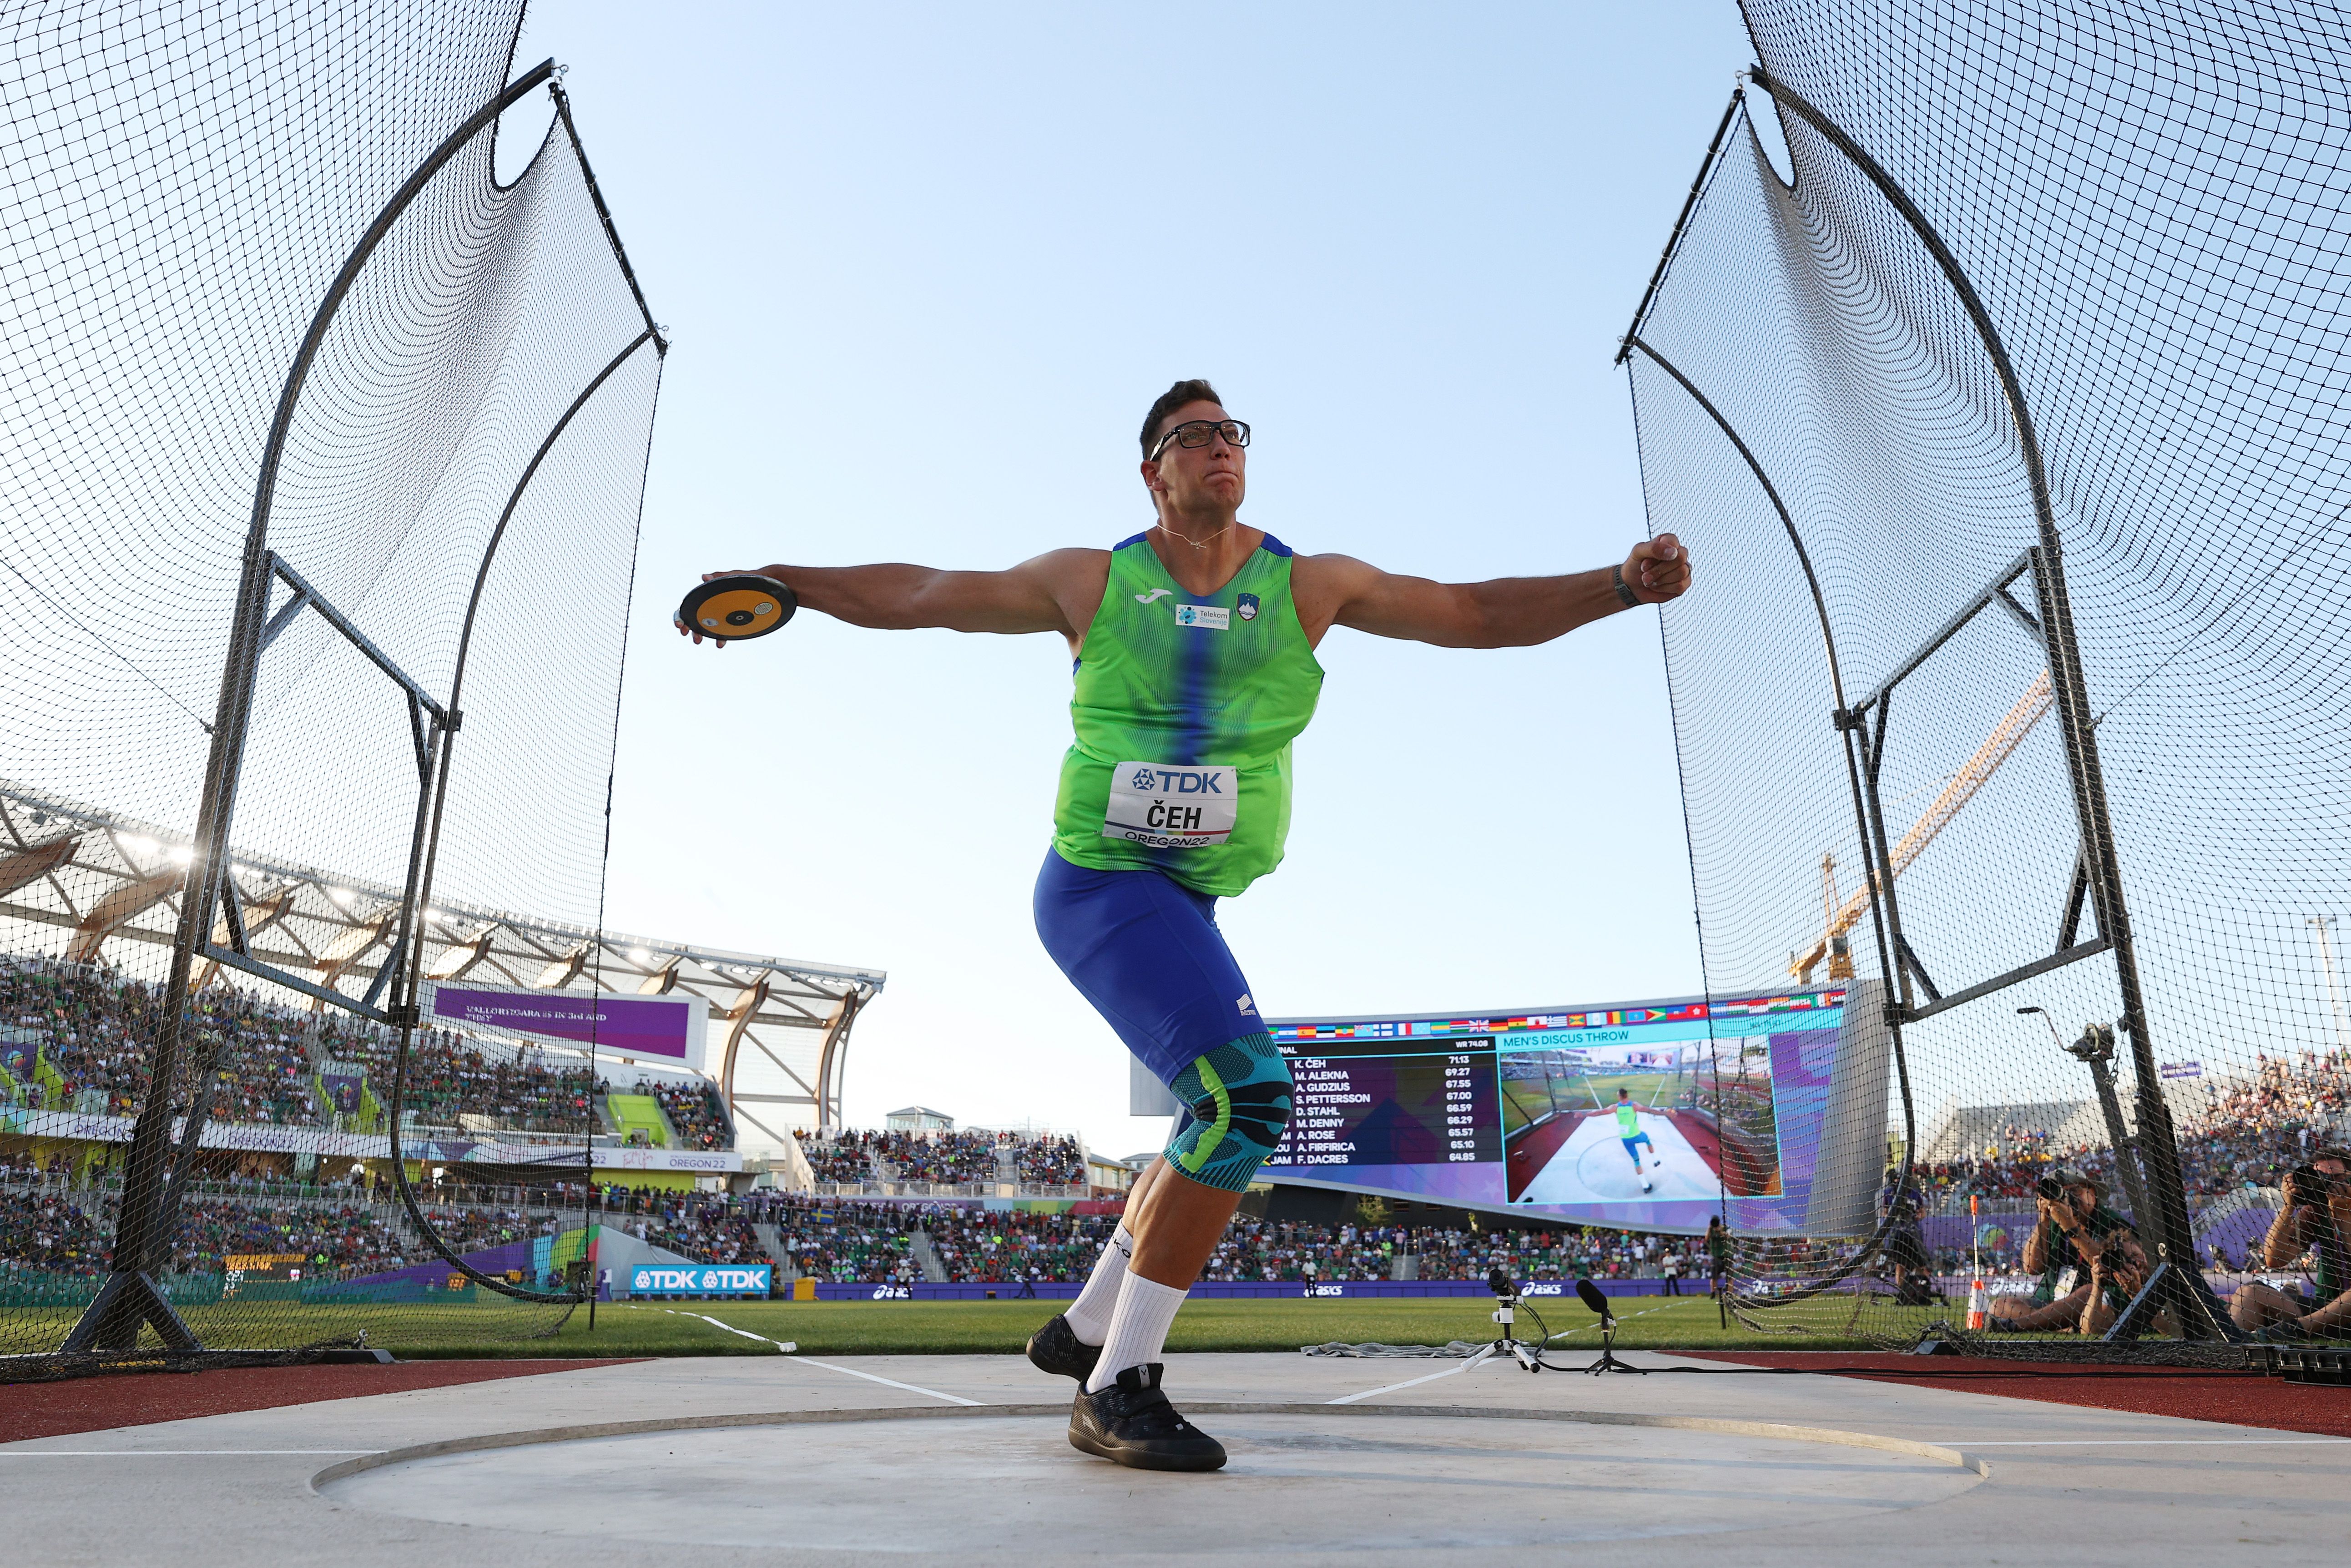 Kristjan Ceh in the discus at the World Athletics Championships Oregon22